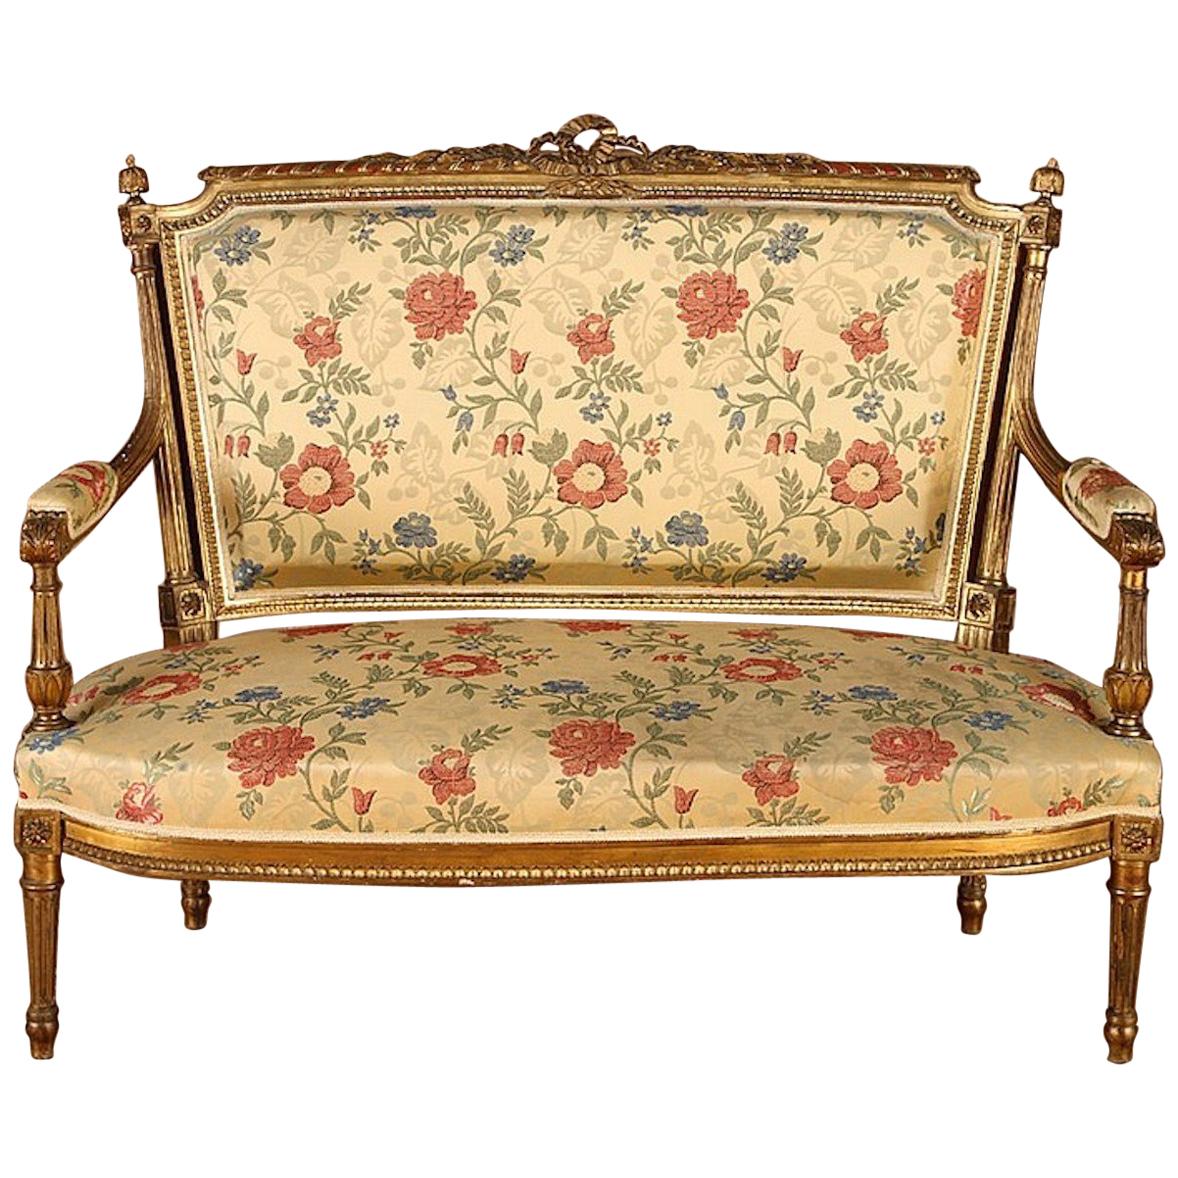 Set of 5, French giltwood Louis XVI style settee and 4 French giltwood open armchairs.
Measures: Settee: Height 41